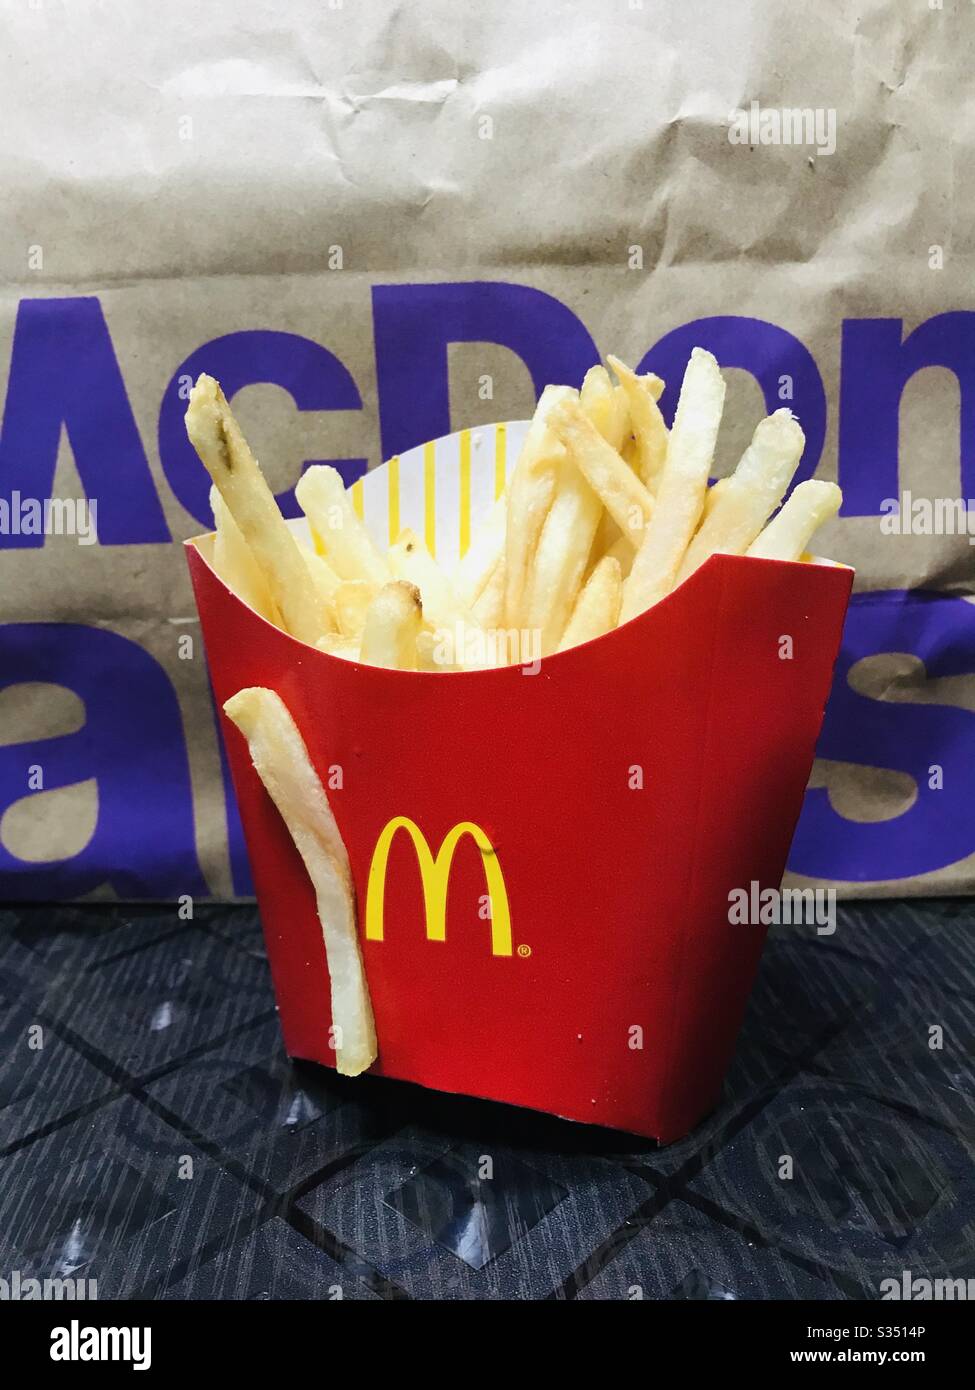 🍟 French Fry Cone Bags 🍟 Our french fry cone bags are perfect for  sandwiches, burgers, french fries, and more. These deli bags are…